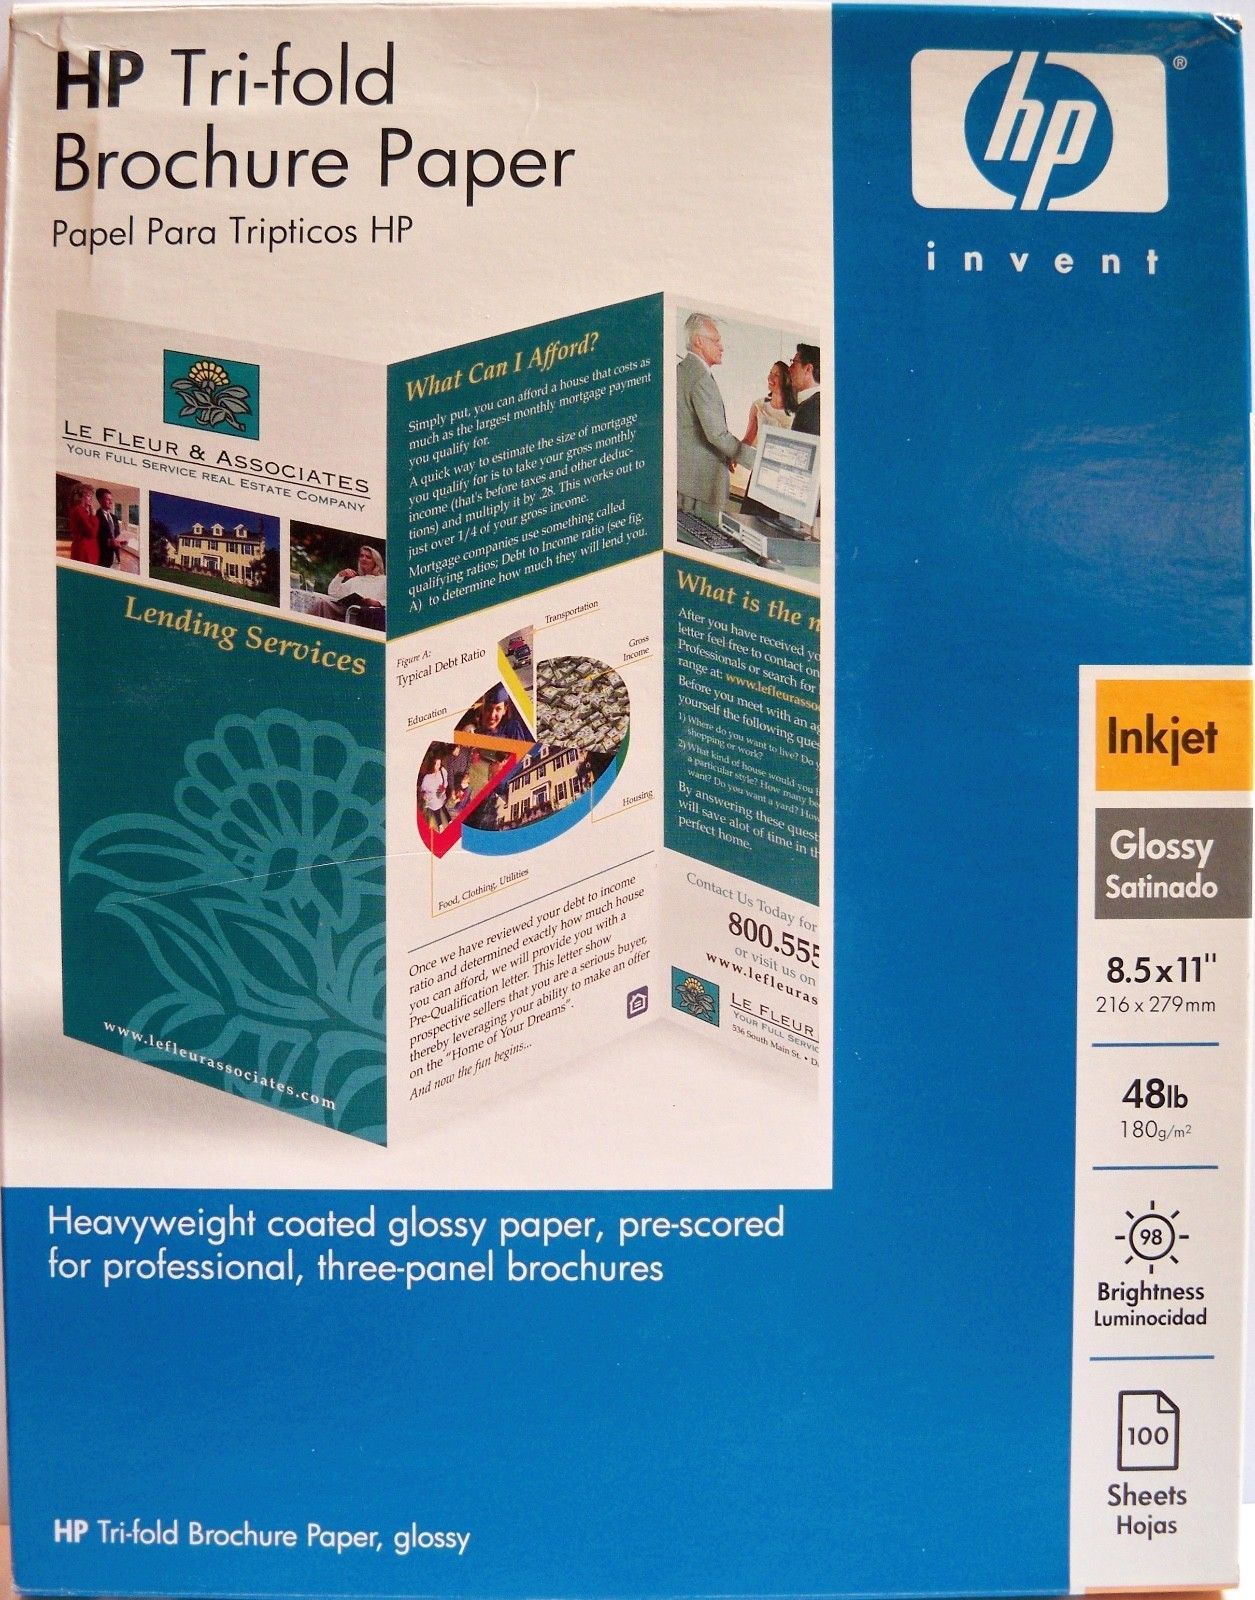 HP Trifold Brochure Paper (Glossy) 100 Sheets [8.5" x 11"] Printer Paper